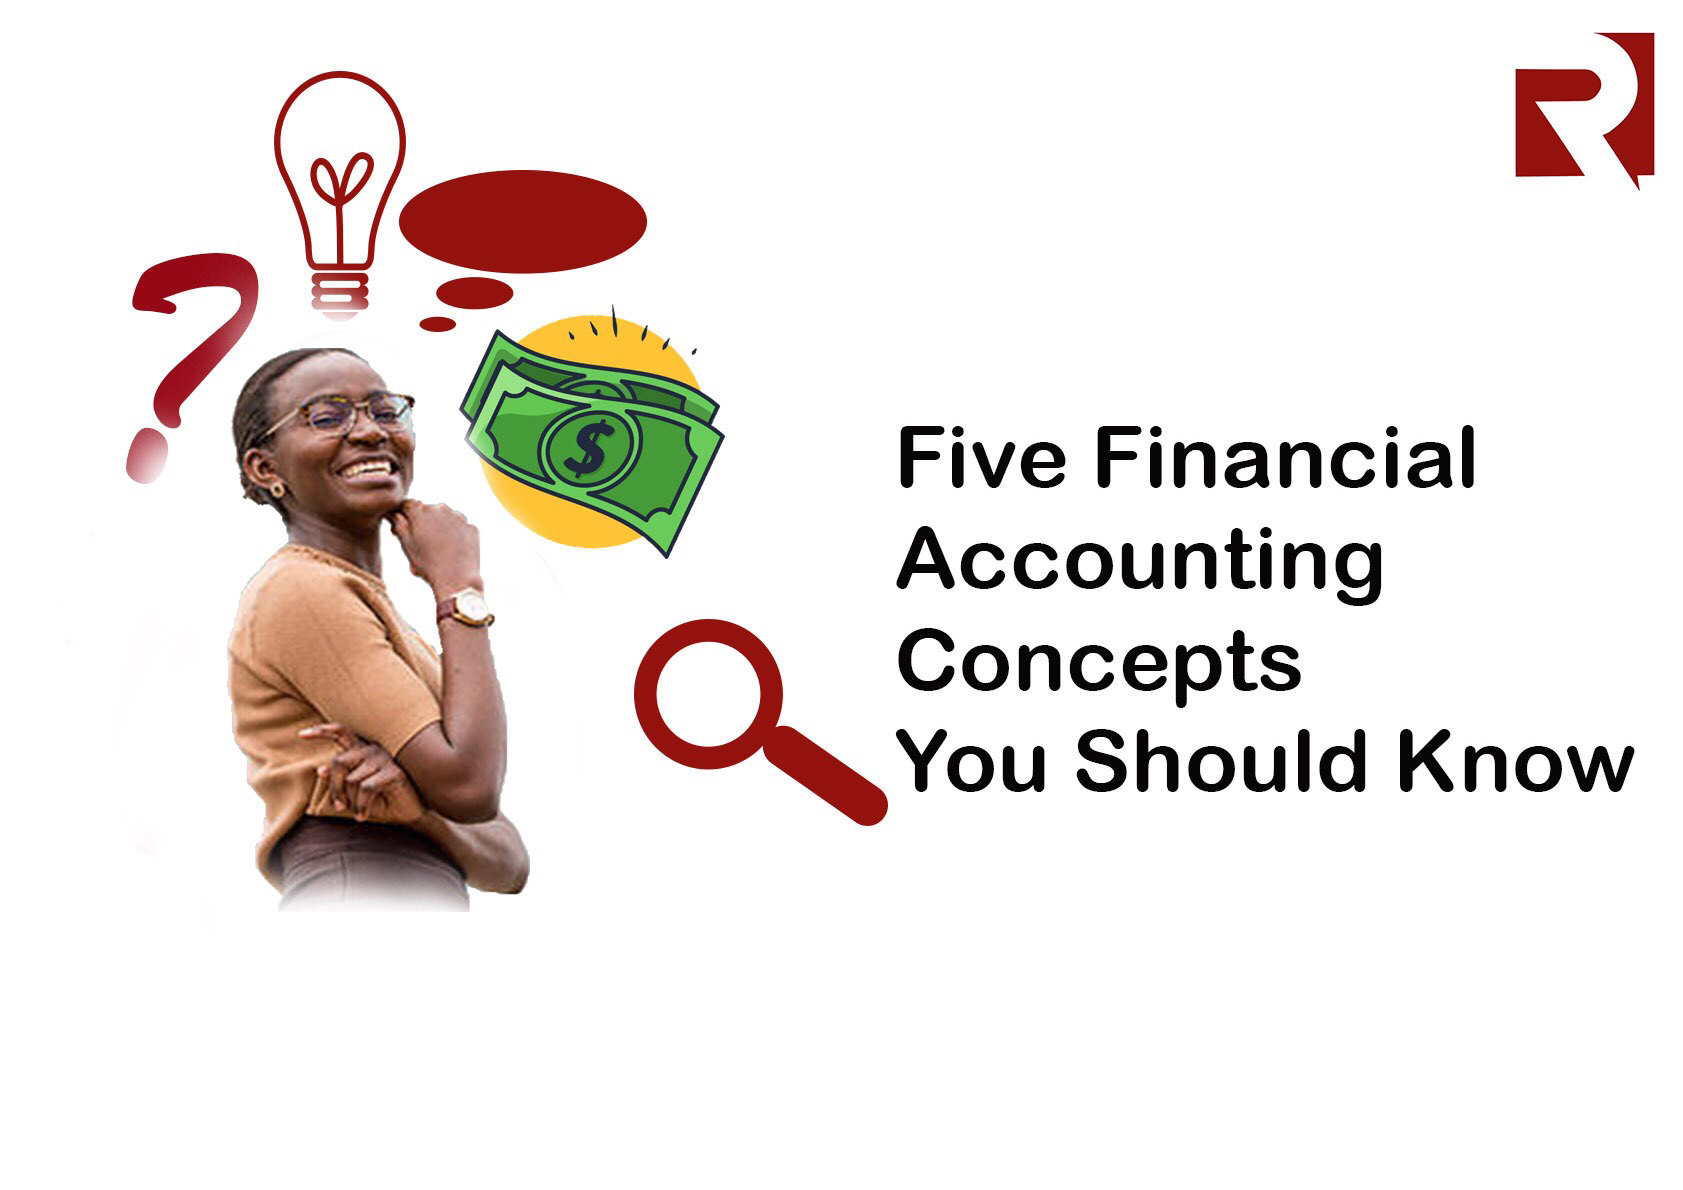 Five Financial Accounting Concepts You Should Know